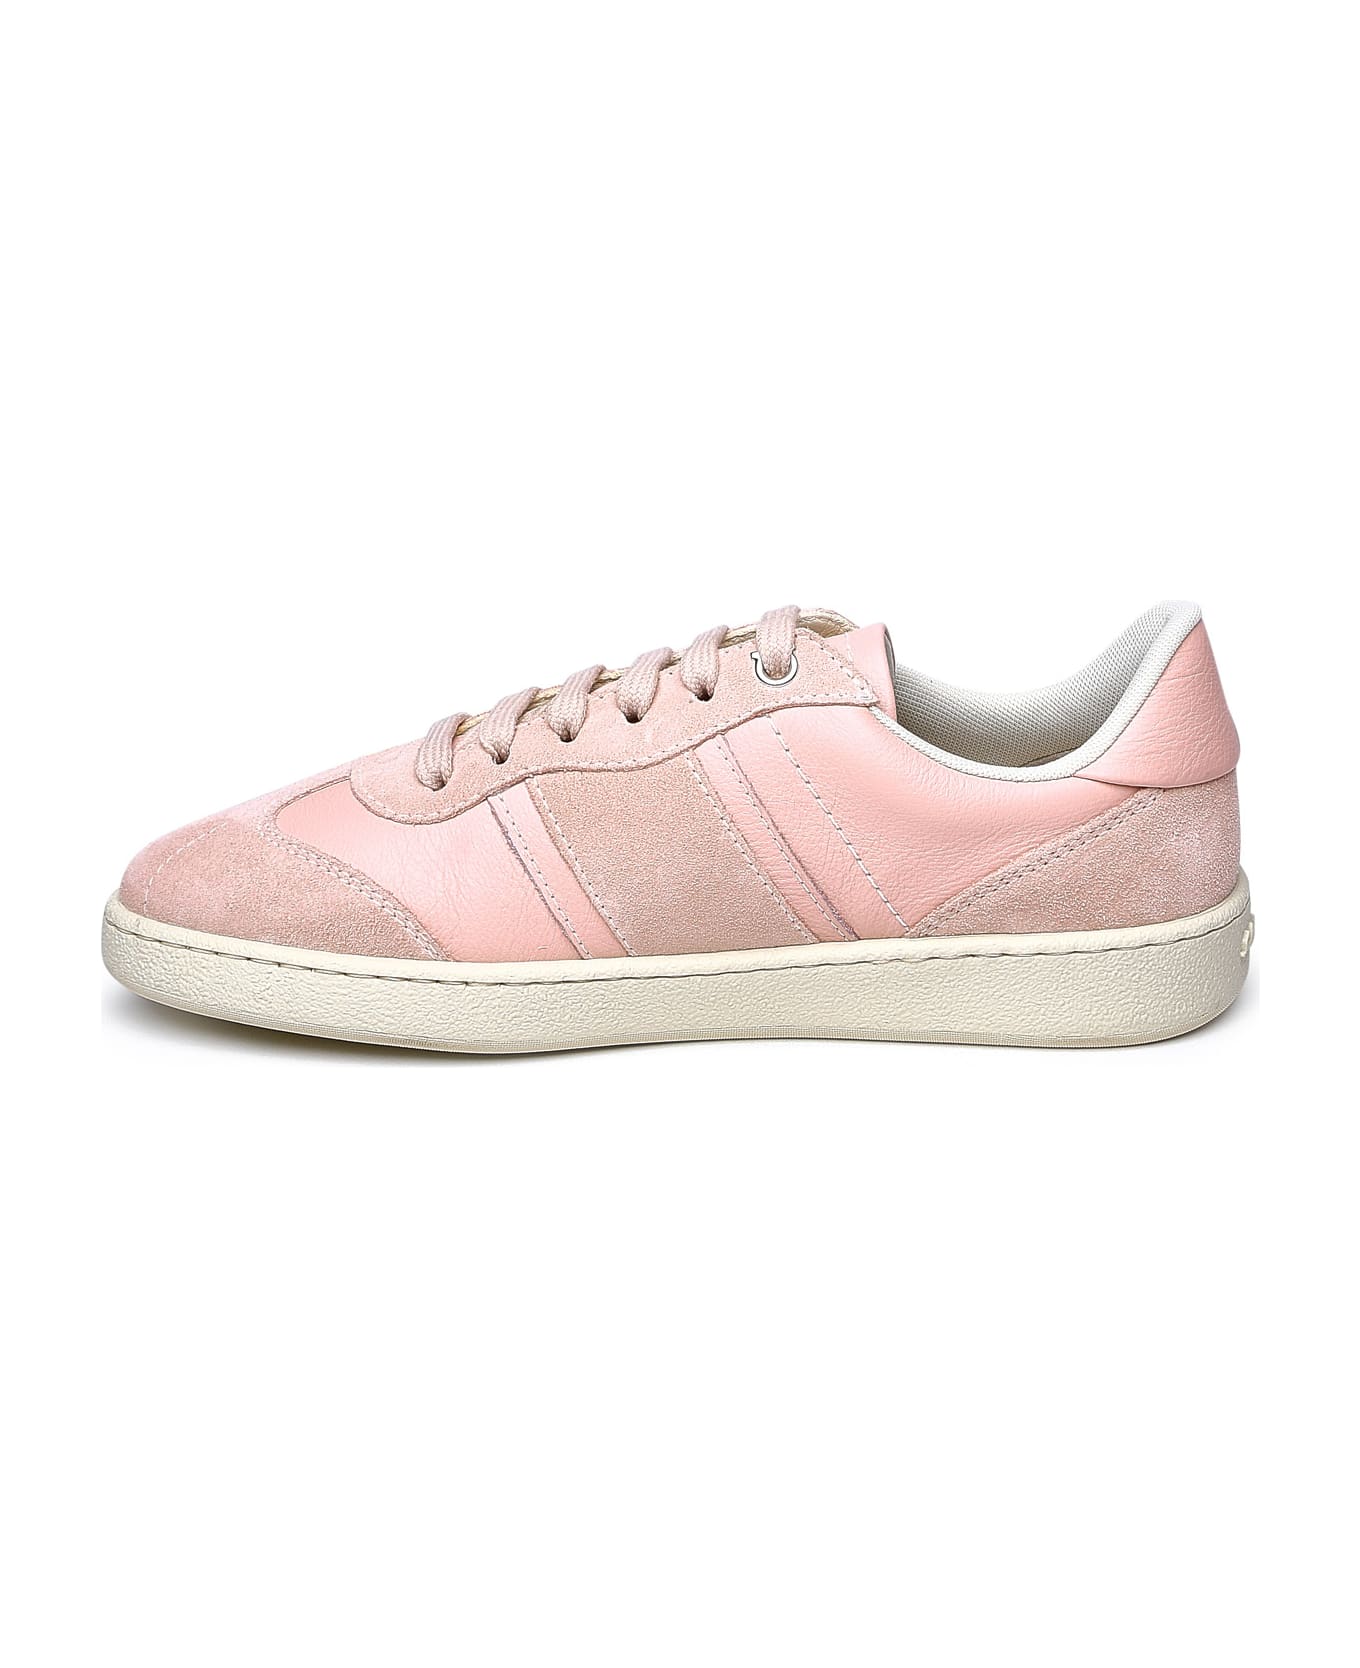 Ferragamo Pink Leather Sneakers - Pink